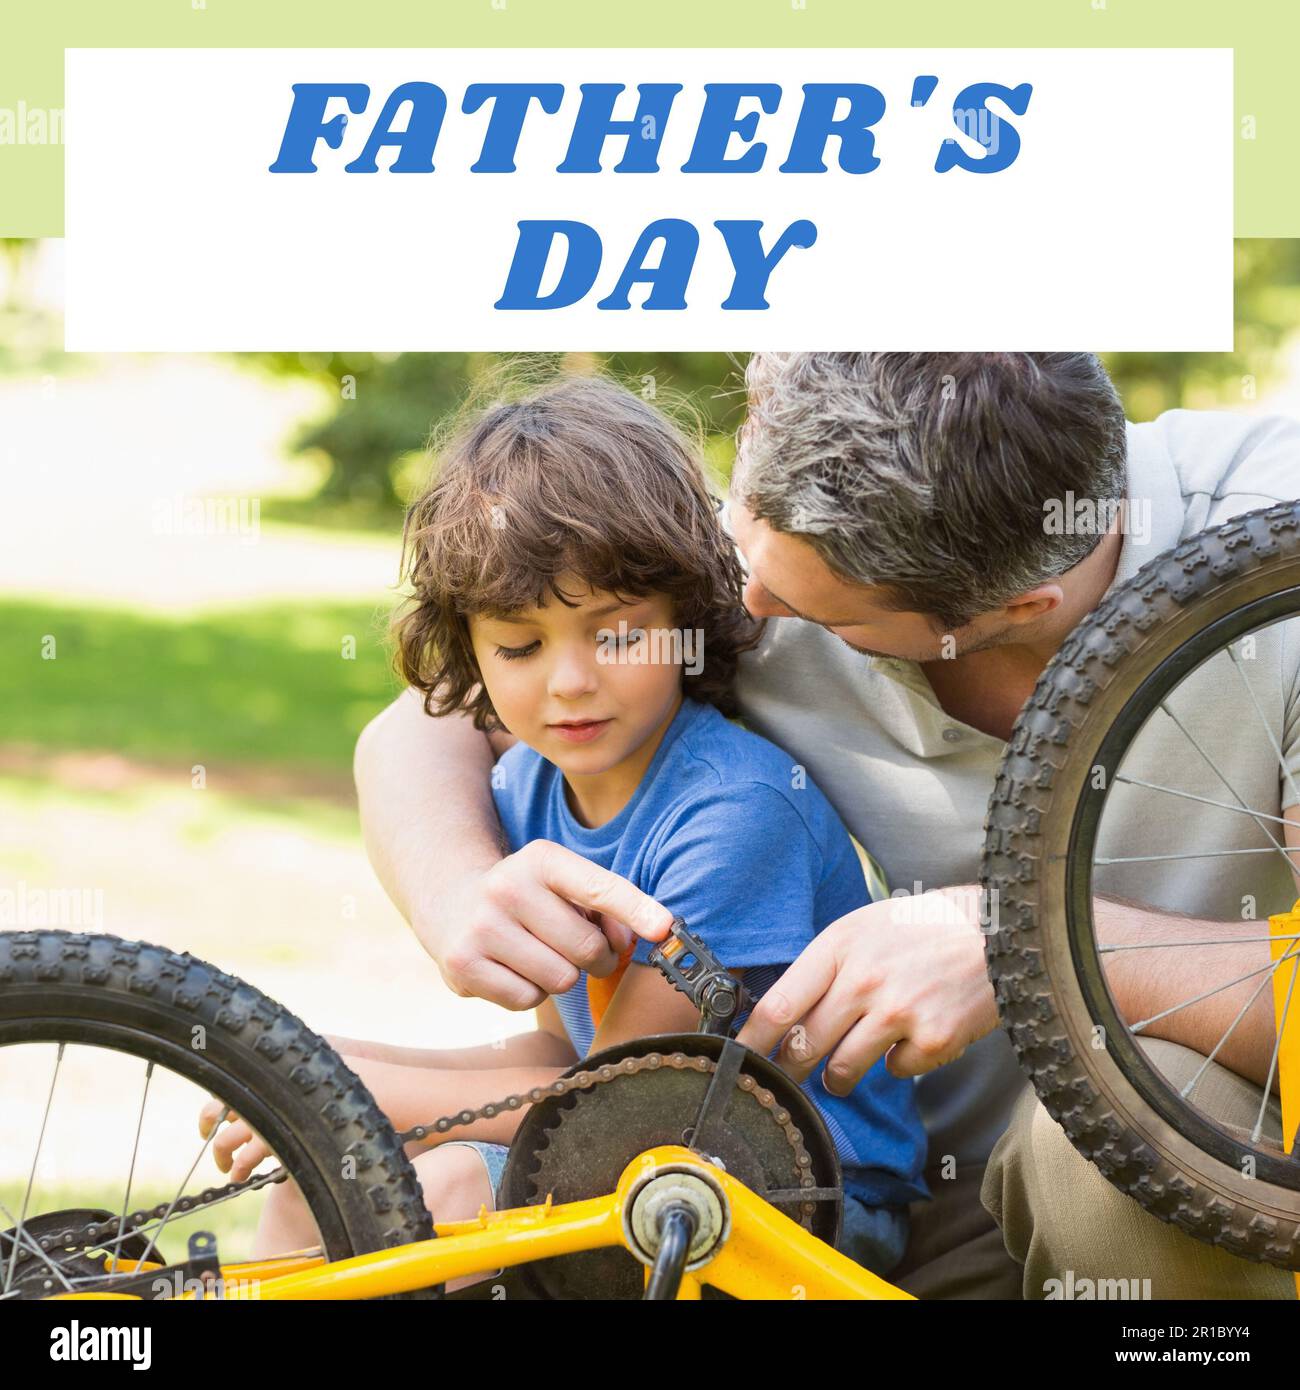 Composition of father's day text over caucasian father with son fixing bike Stock Photo